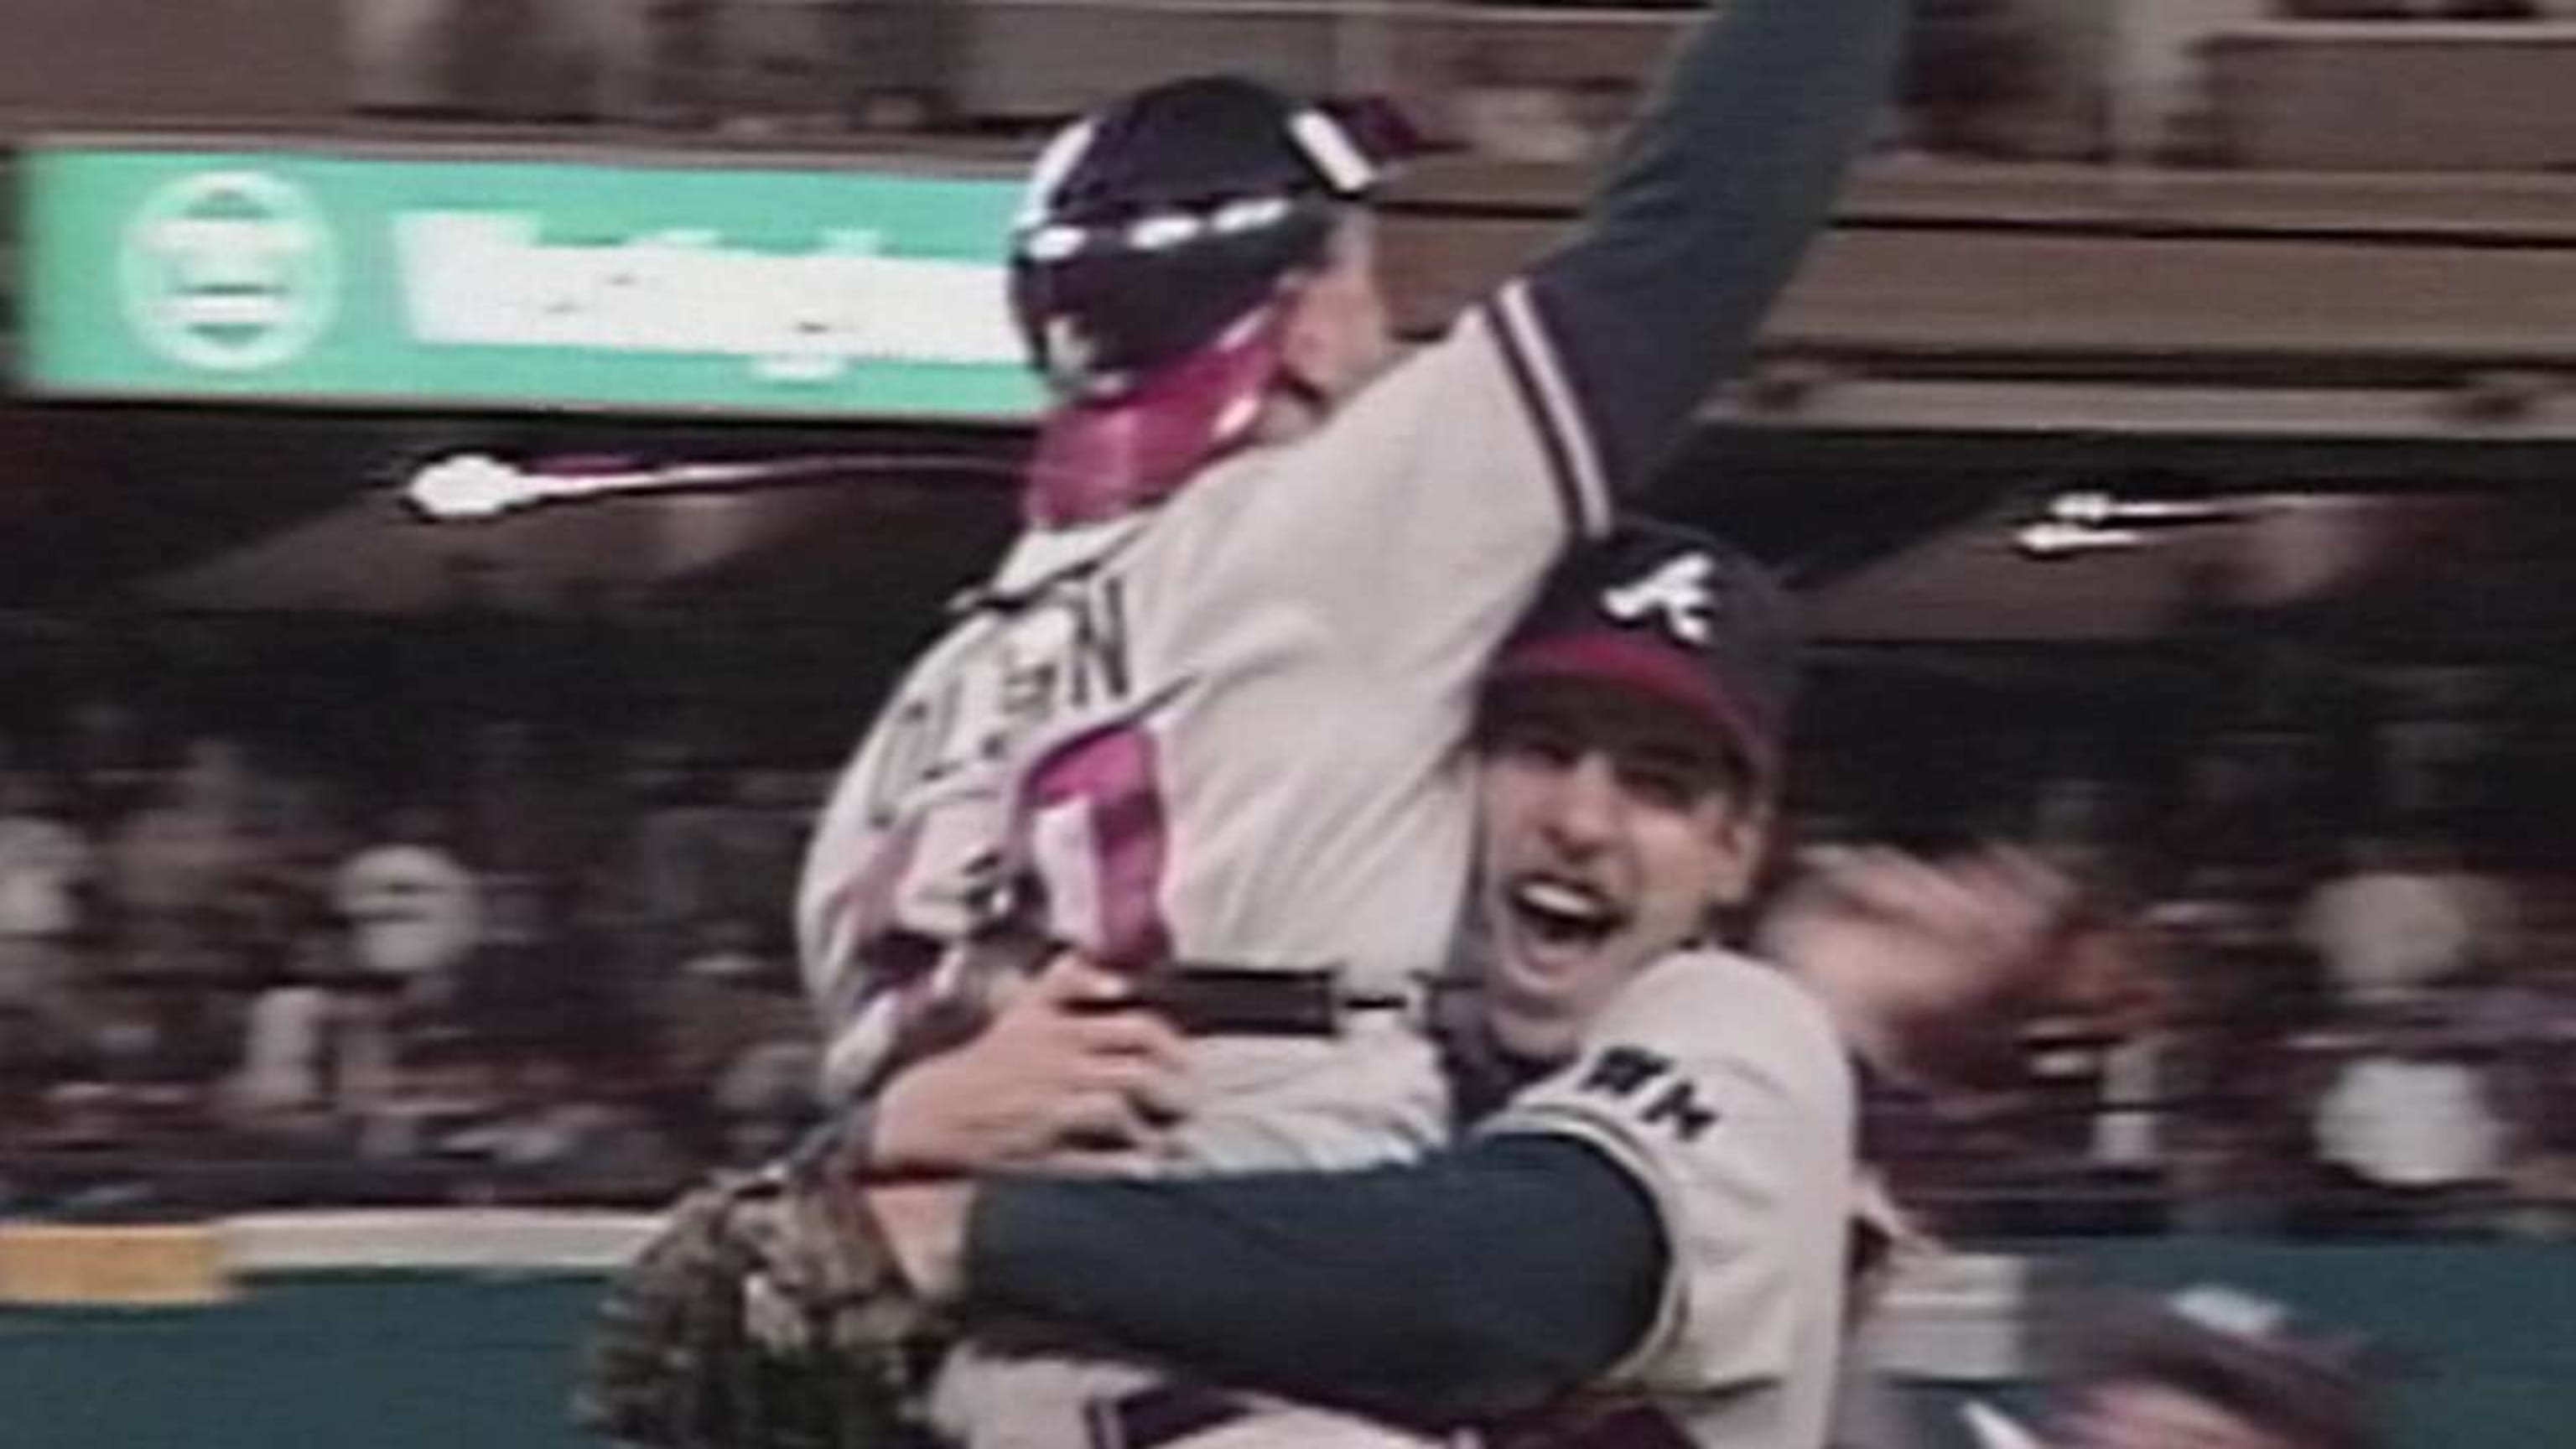 Sid Bream beats out Barry Bond's throw to win Game 7 of the '92